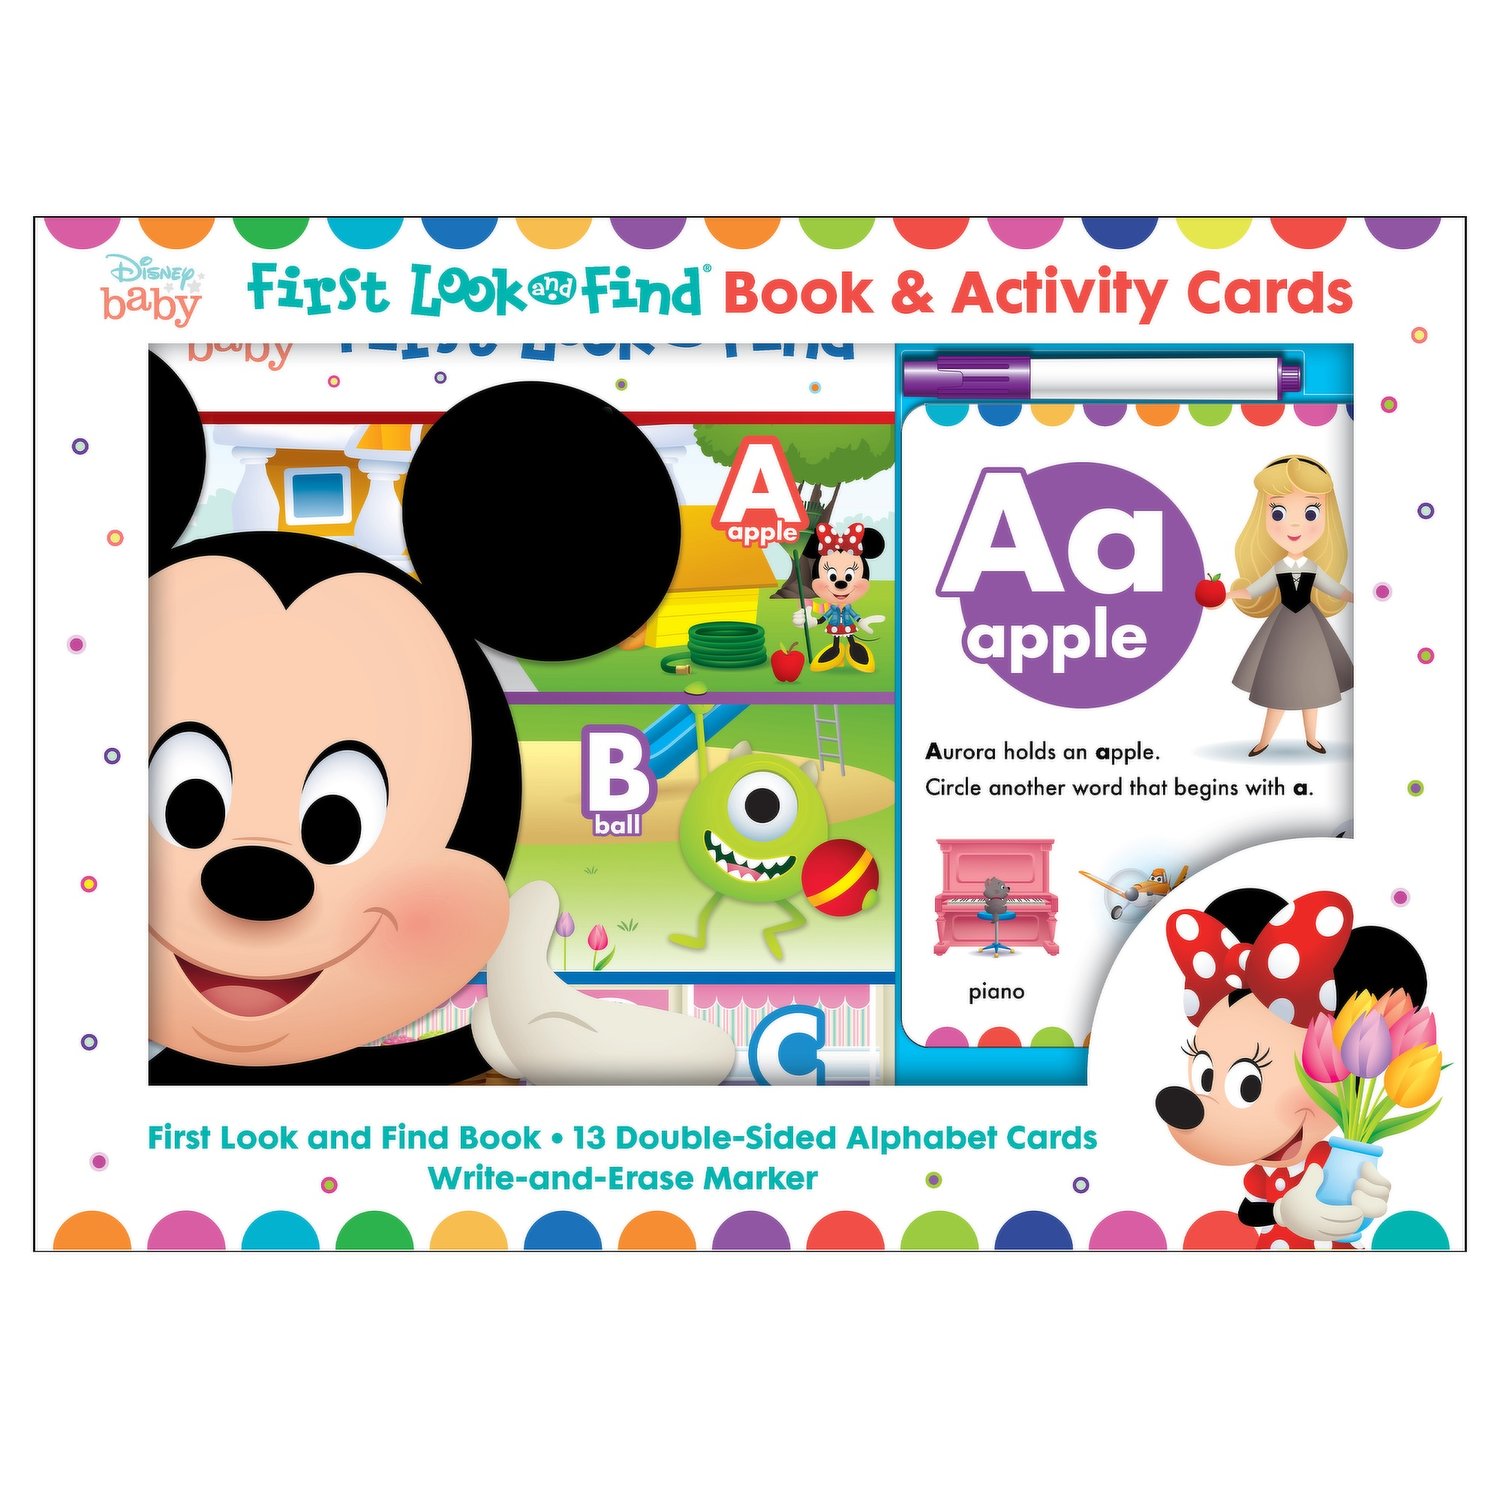 Disney Baby - First Look and Find Book & Activity Cards